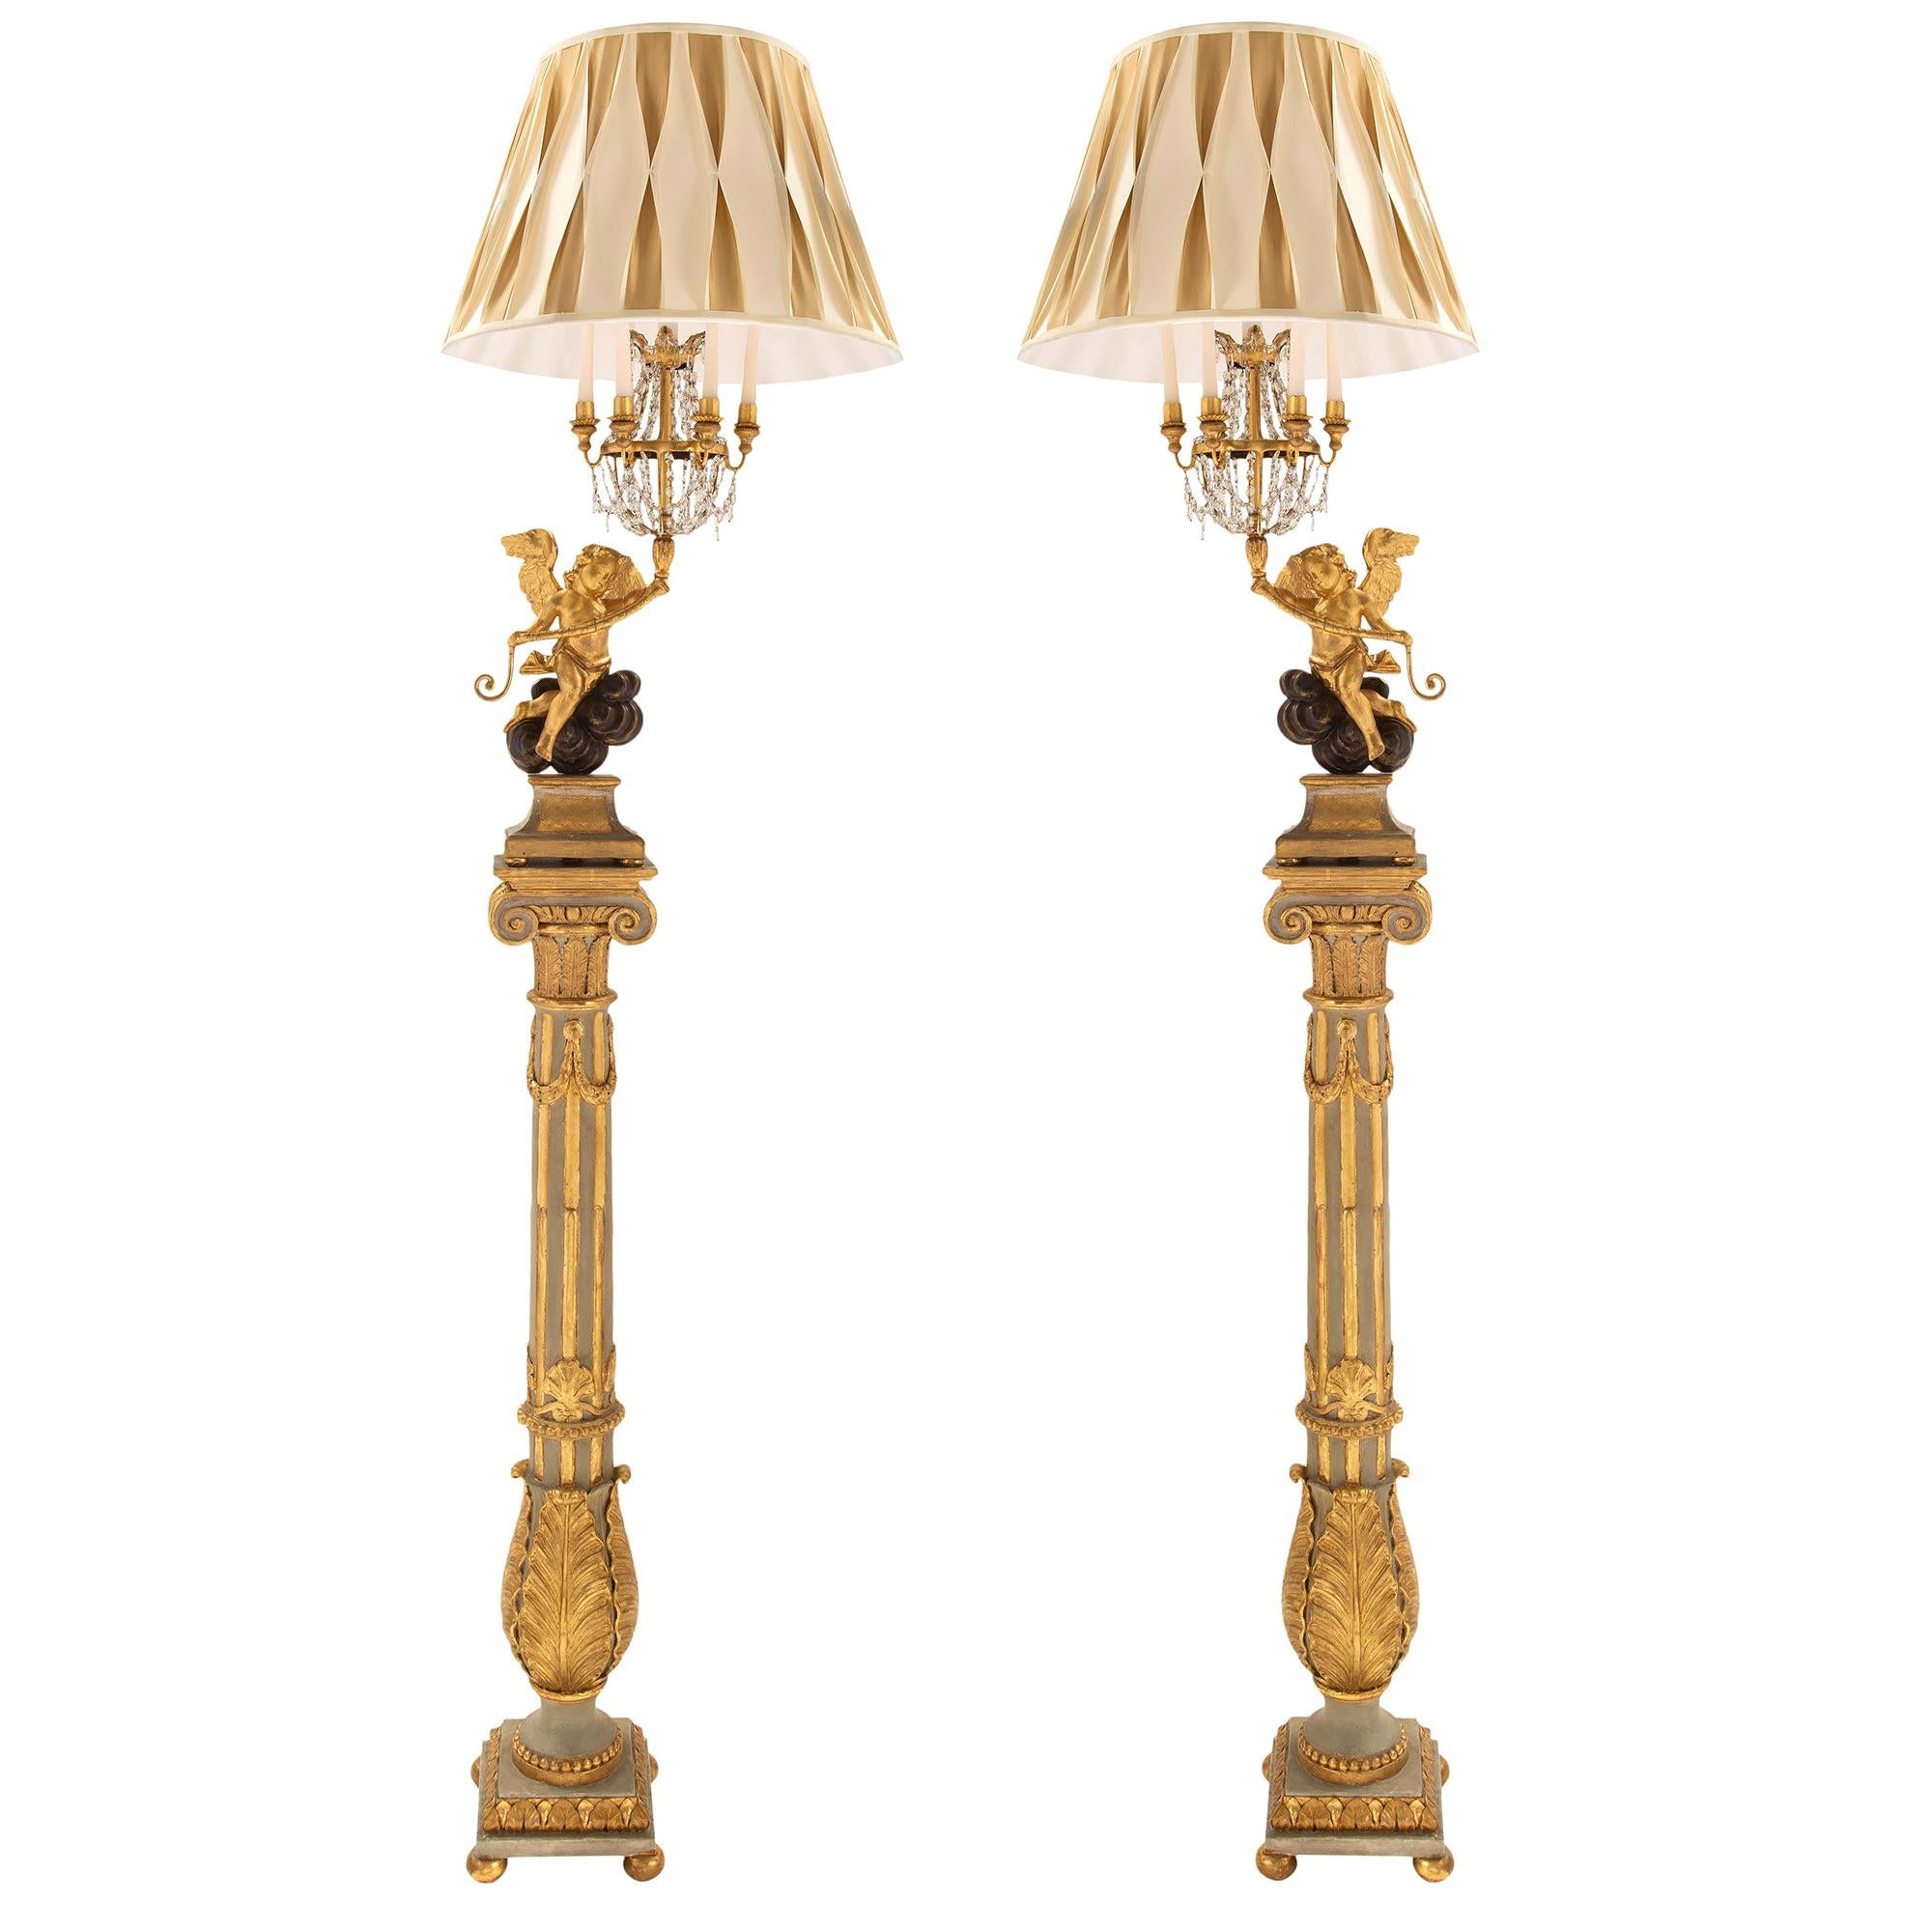 True Pair of Italian Early 19th Century Louis XVI Style Giltwood Floor Lamps For Sale